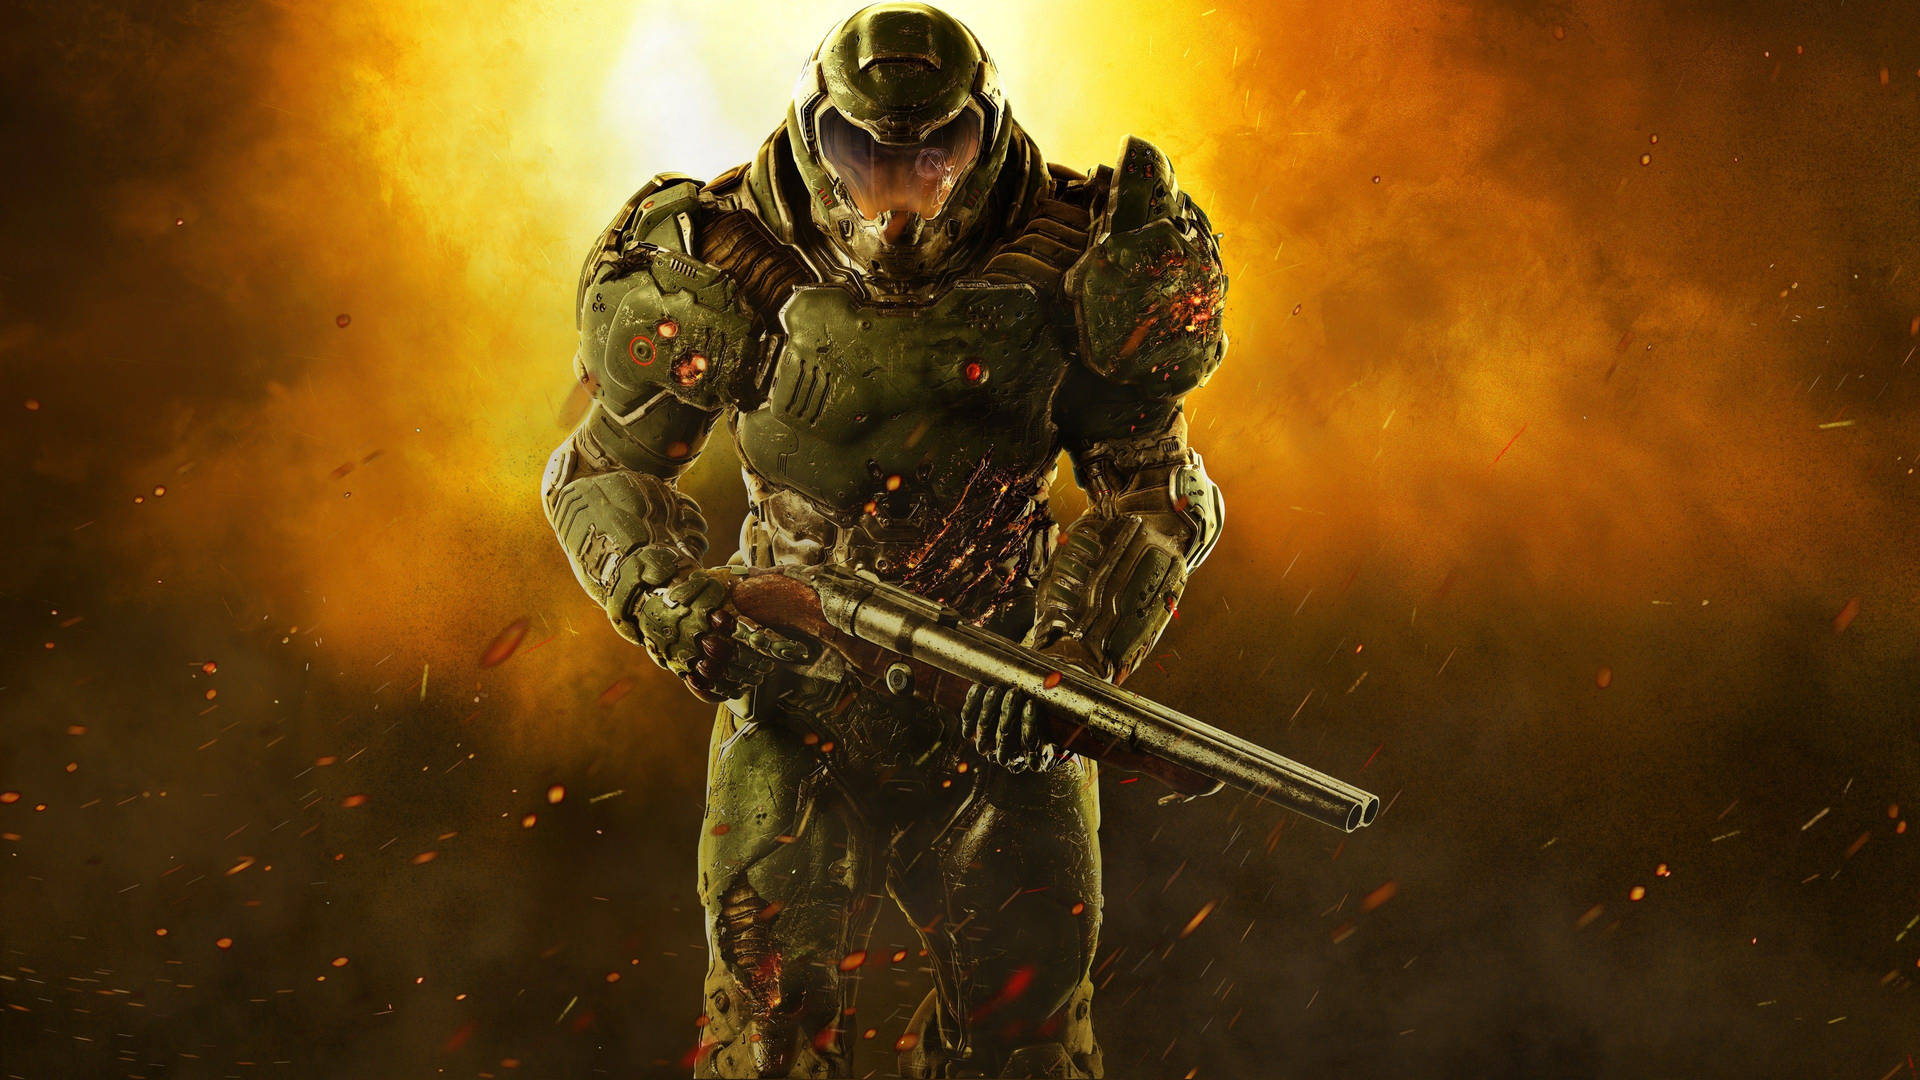 Master the art of survival while fighting dangerous monsters in DOOM Wallpaper